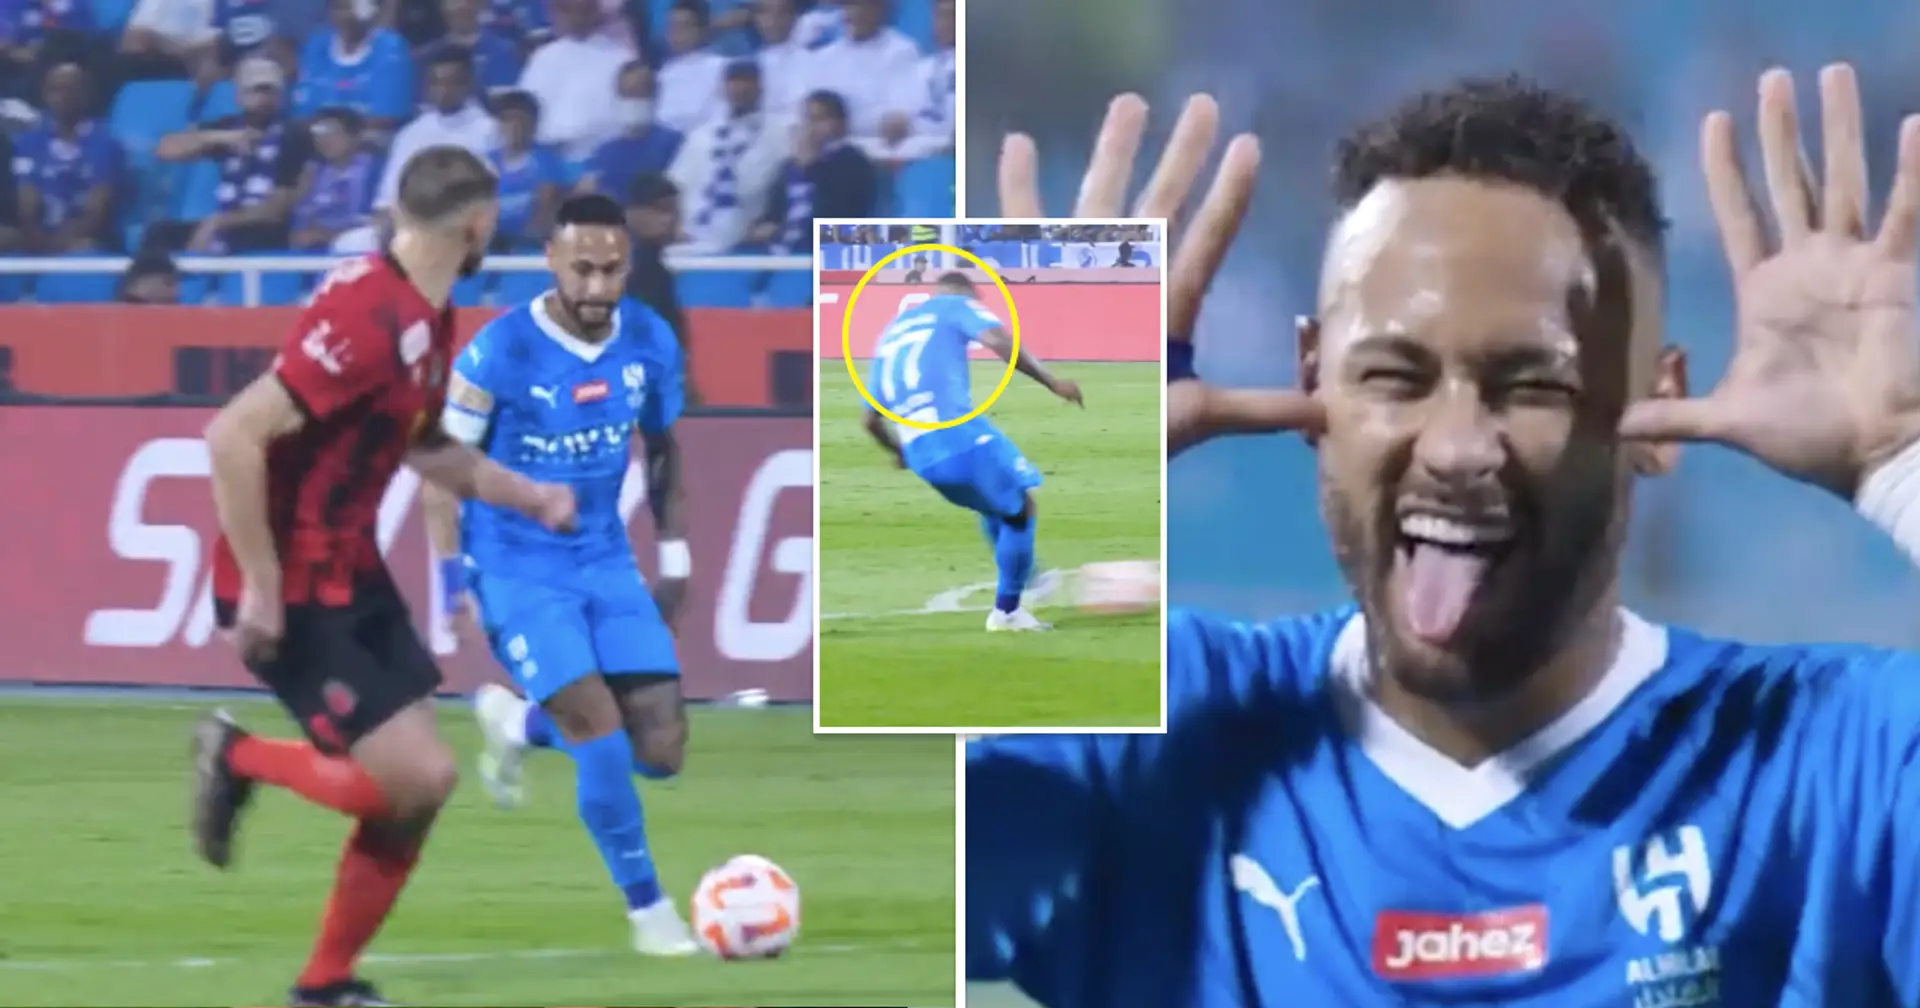 Neymar sets ex-Blaugrana player up for goal with beautiful pass on Al Hilal debut (video)